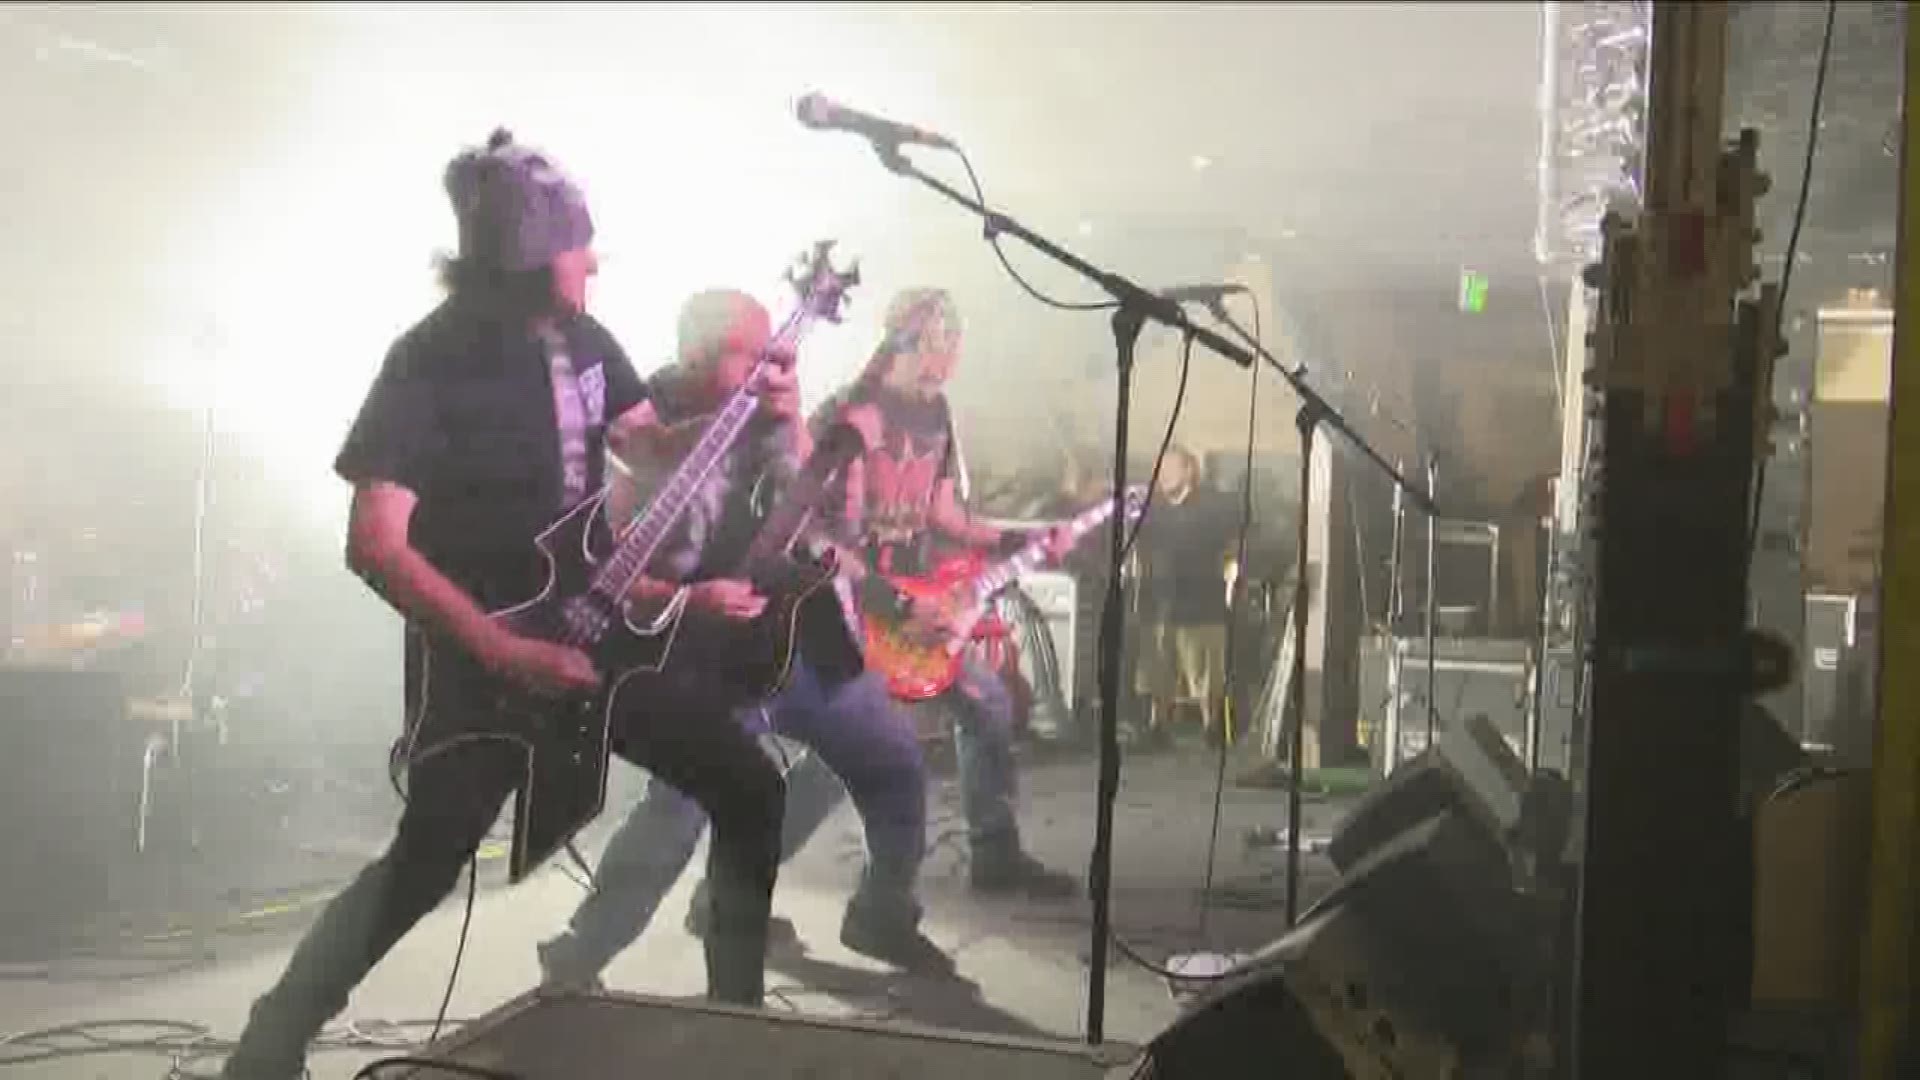 After a fire shut the concert hall down, a group of Boise-based bands are playing to raise money for employees now out of work.